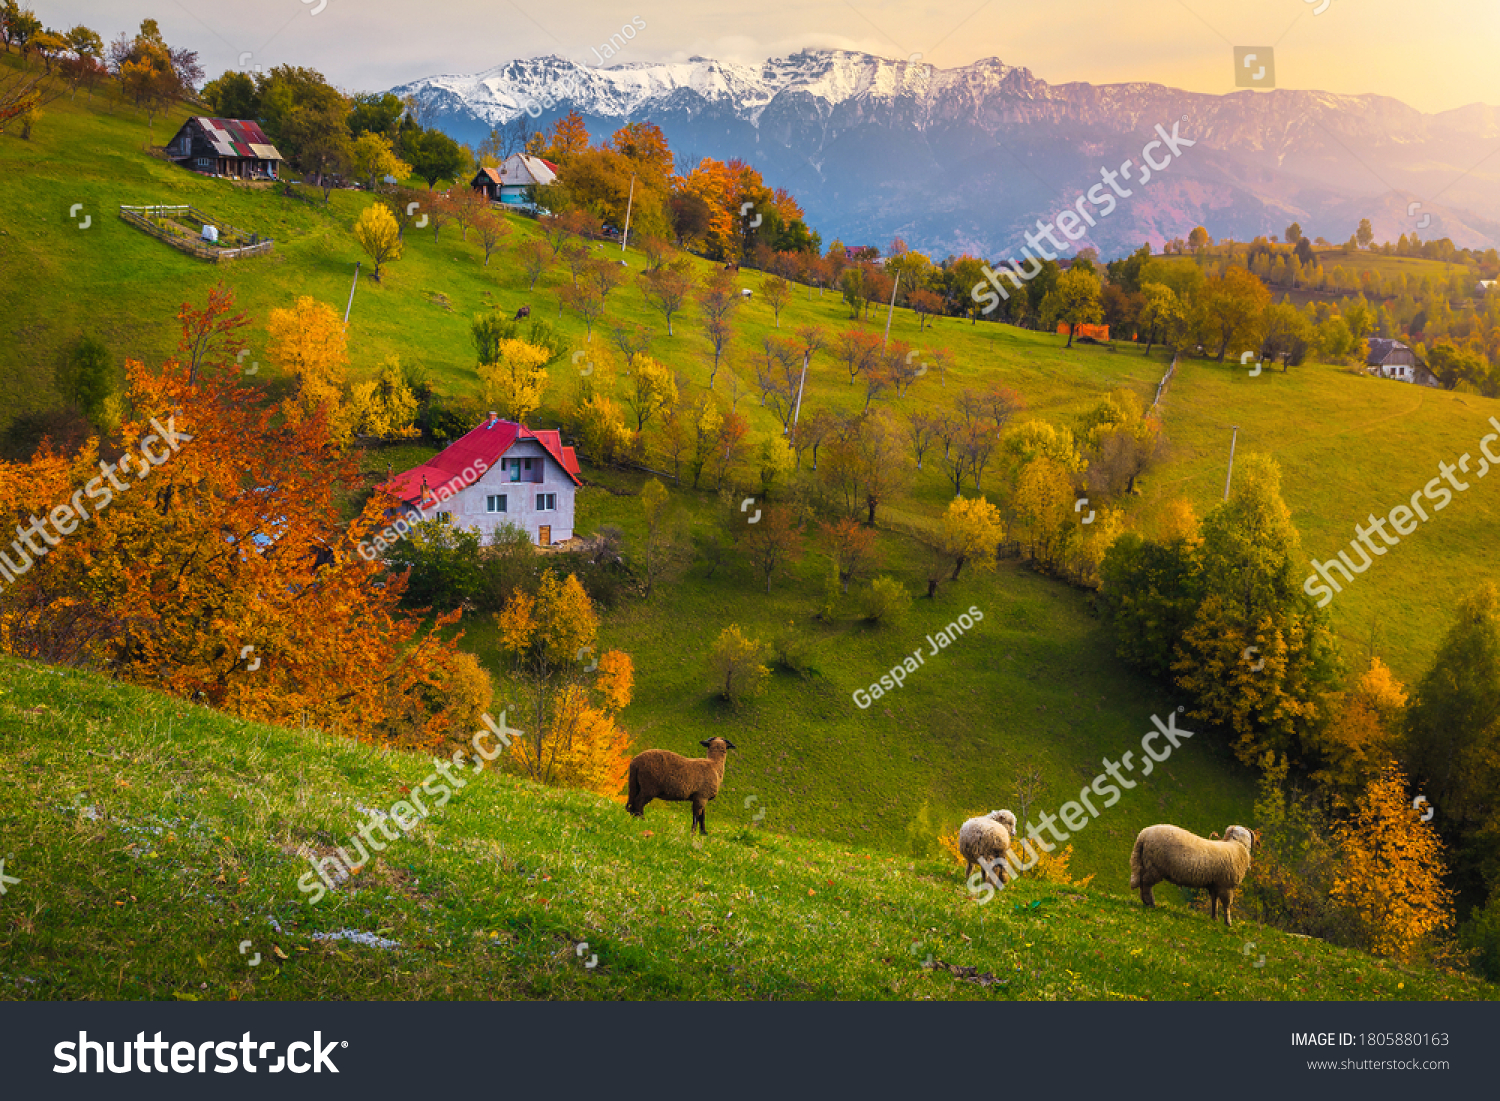 Idyllic autumn countryside landscape with grazing sheeps and snowy mountains in background. Colorful deciduous trees on the hills at sunset, Magura village near Brasov, Transylvania, Romania, Europe